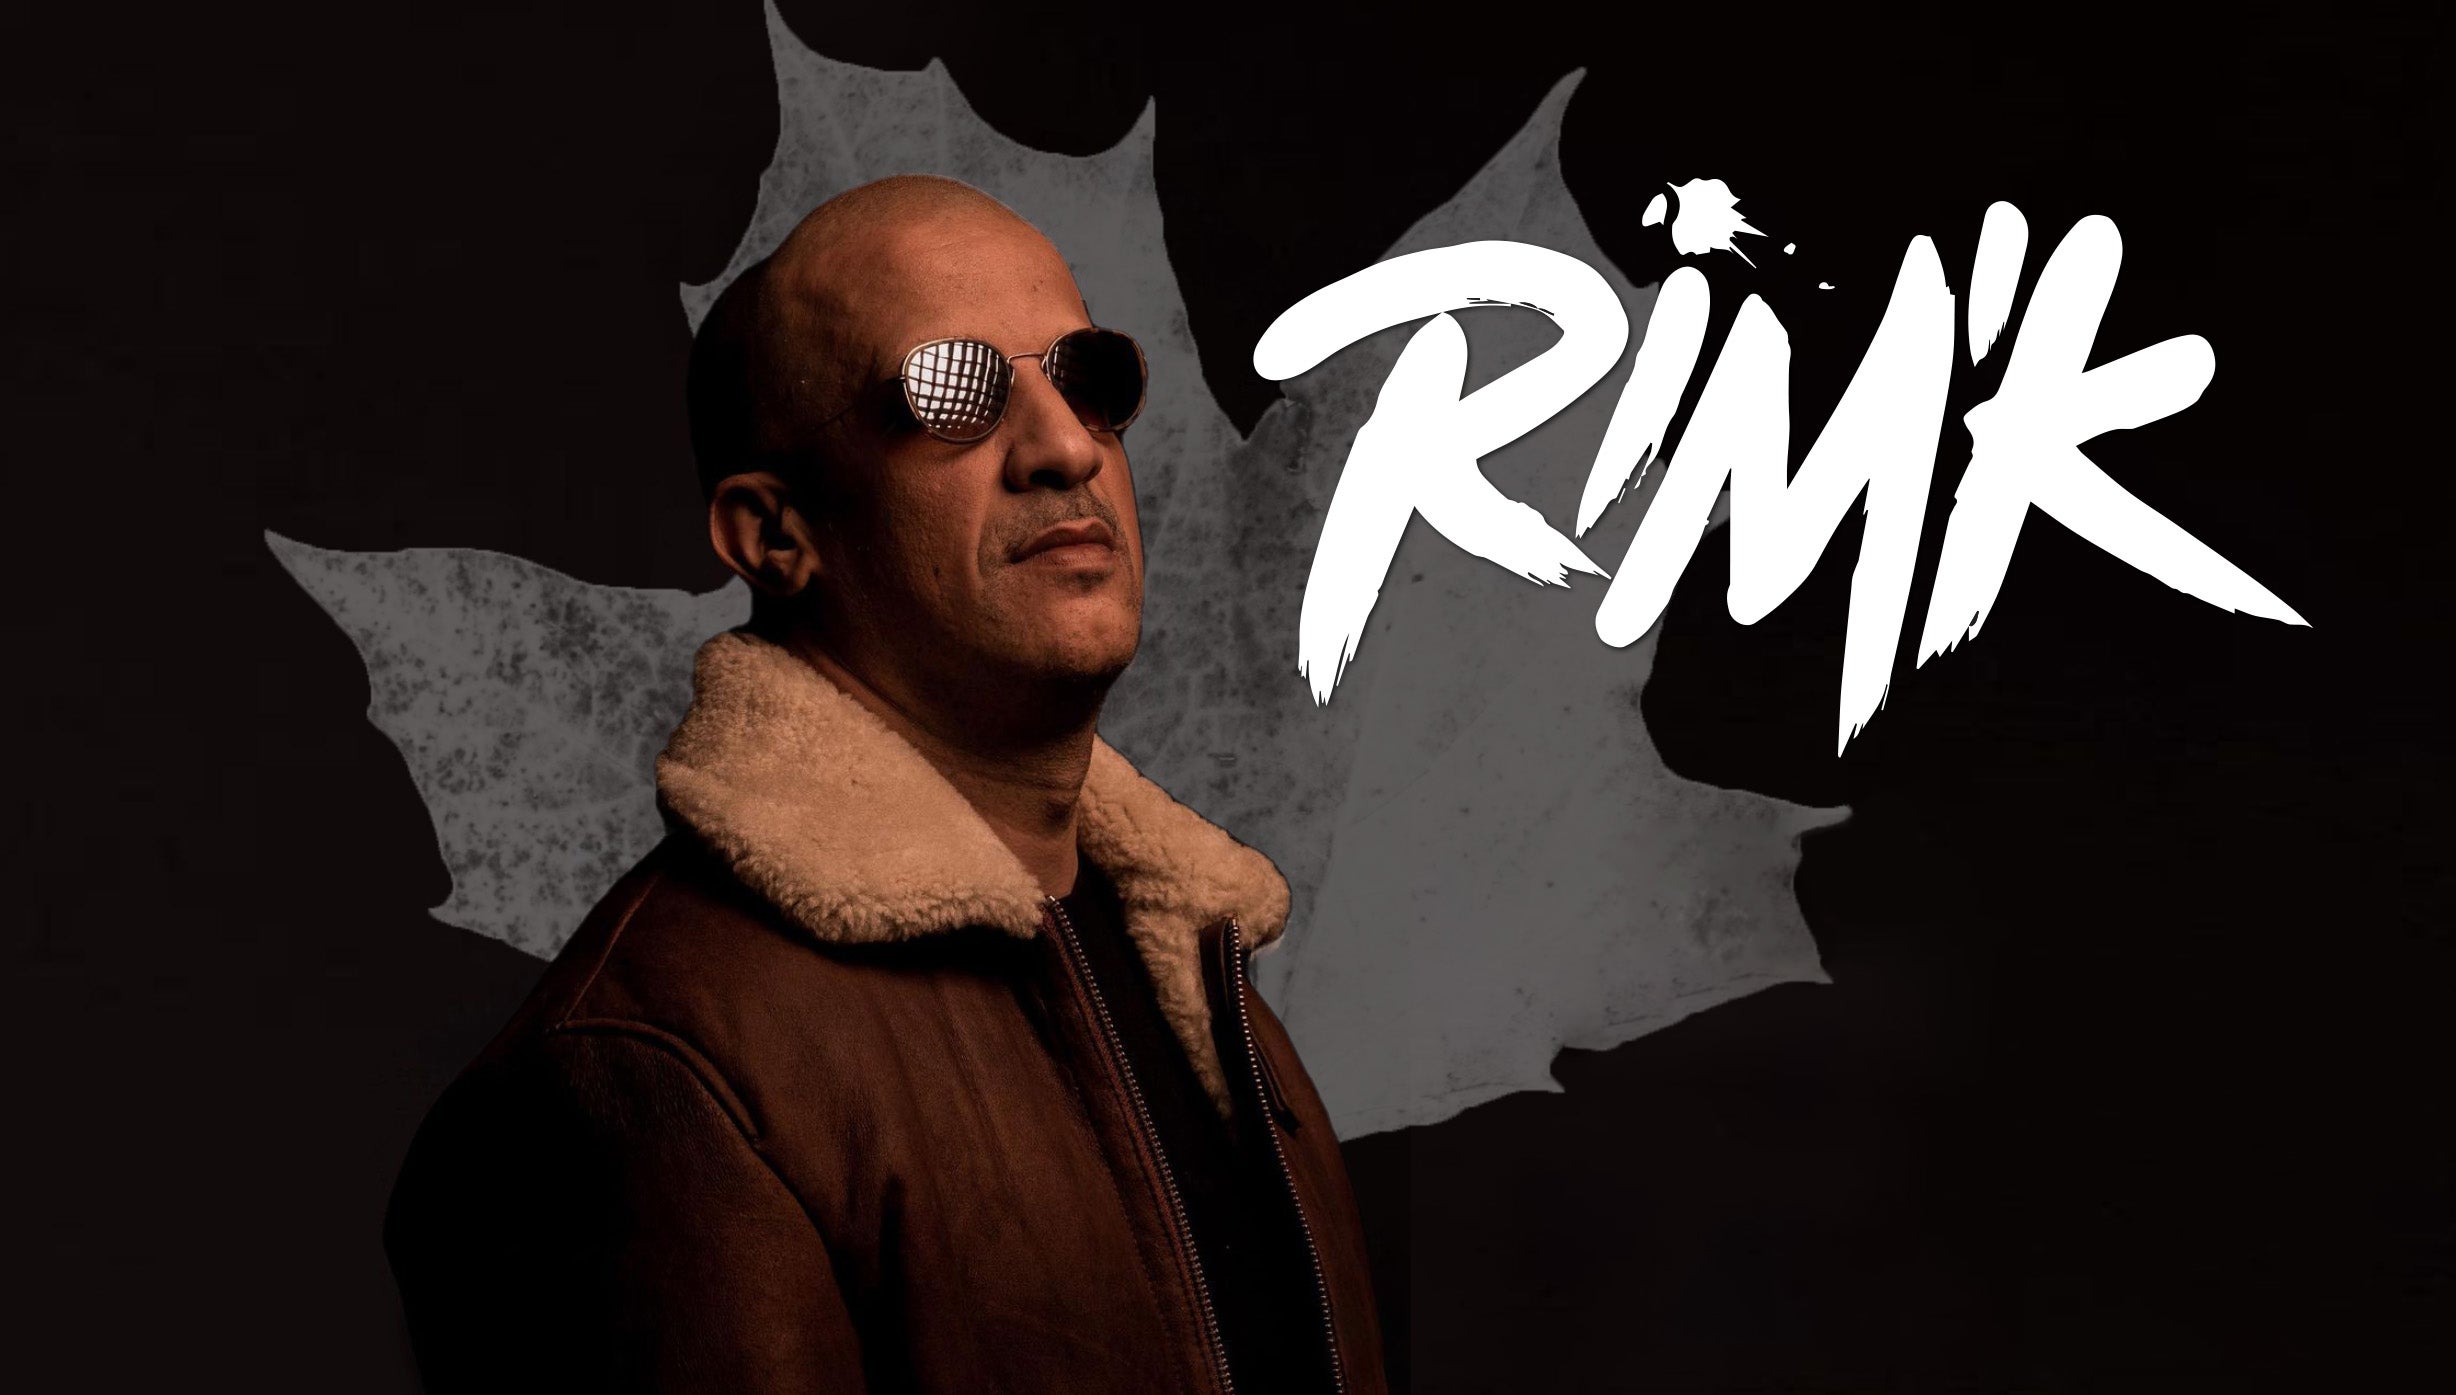 RIM'K free presale code for show tickets in Montreal, QC (MTELUS)